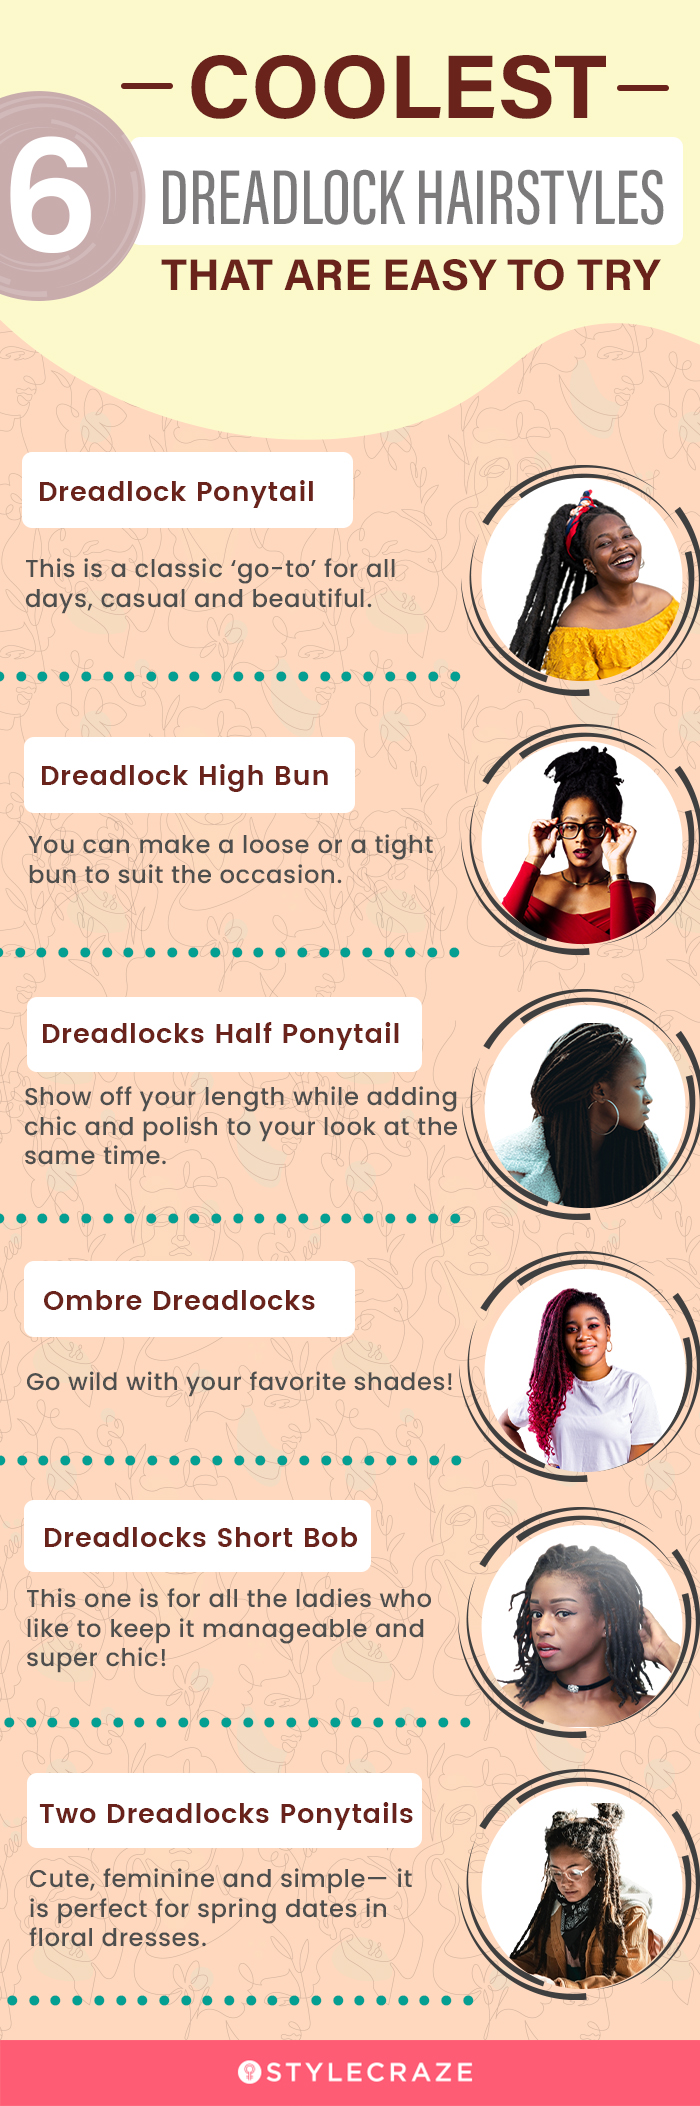 6 coolest dreadlock hairstyles (infographic)